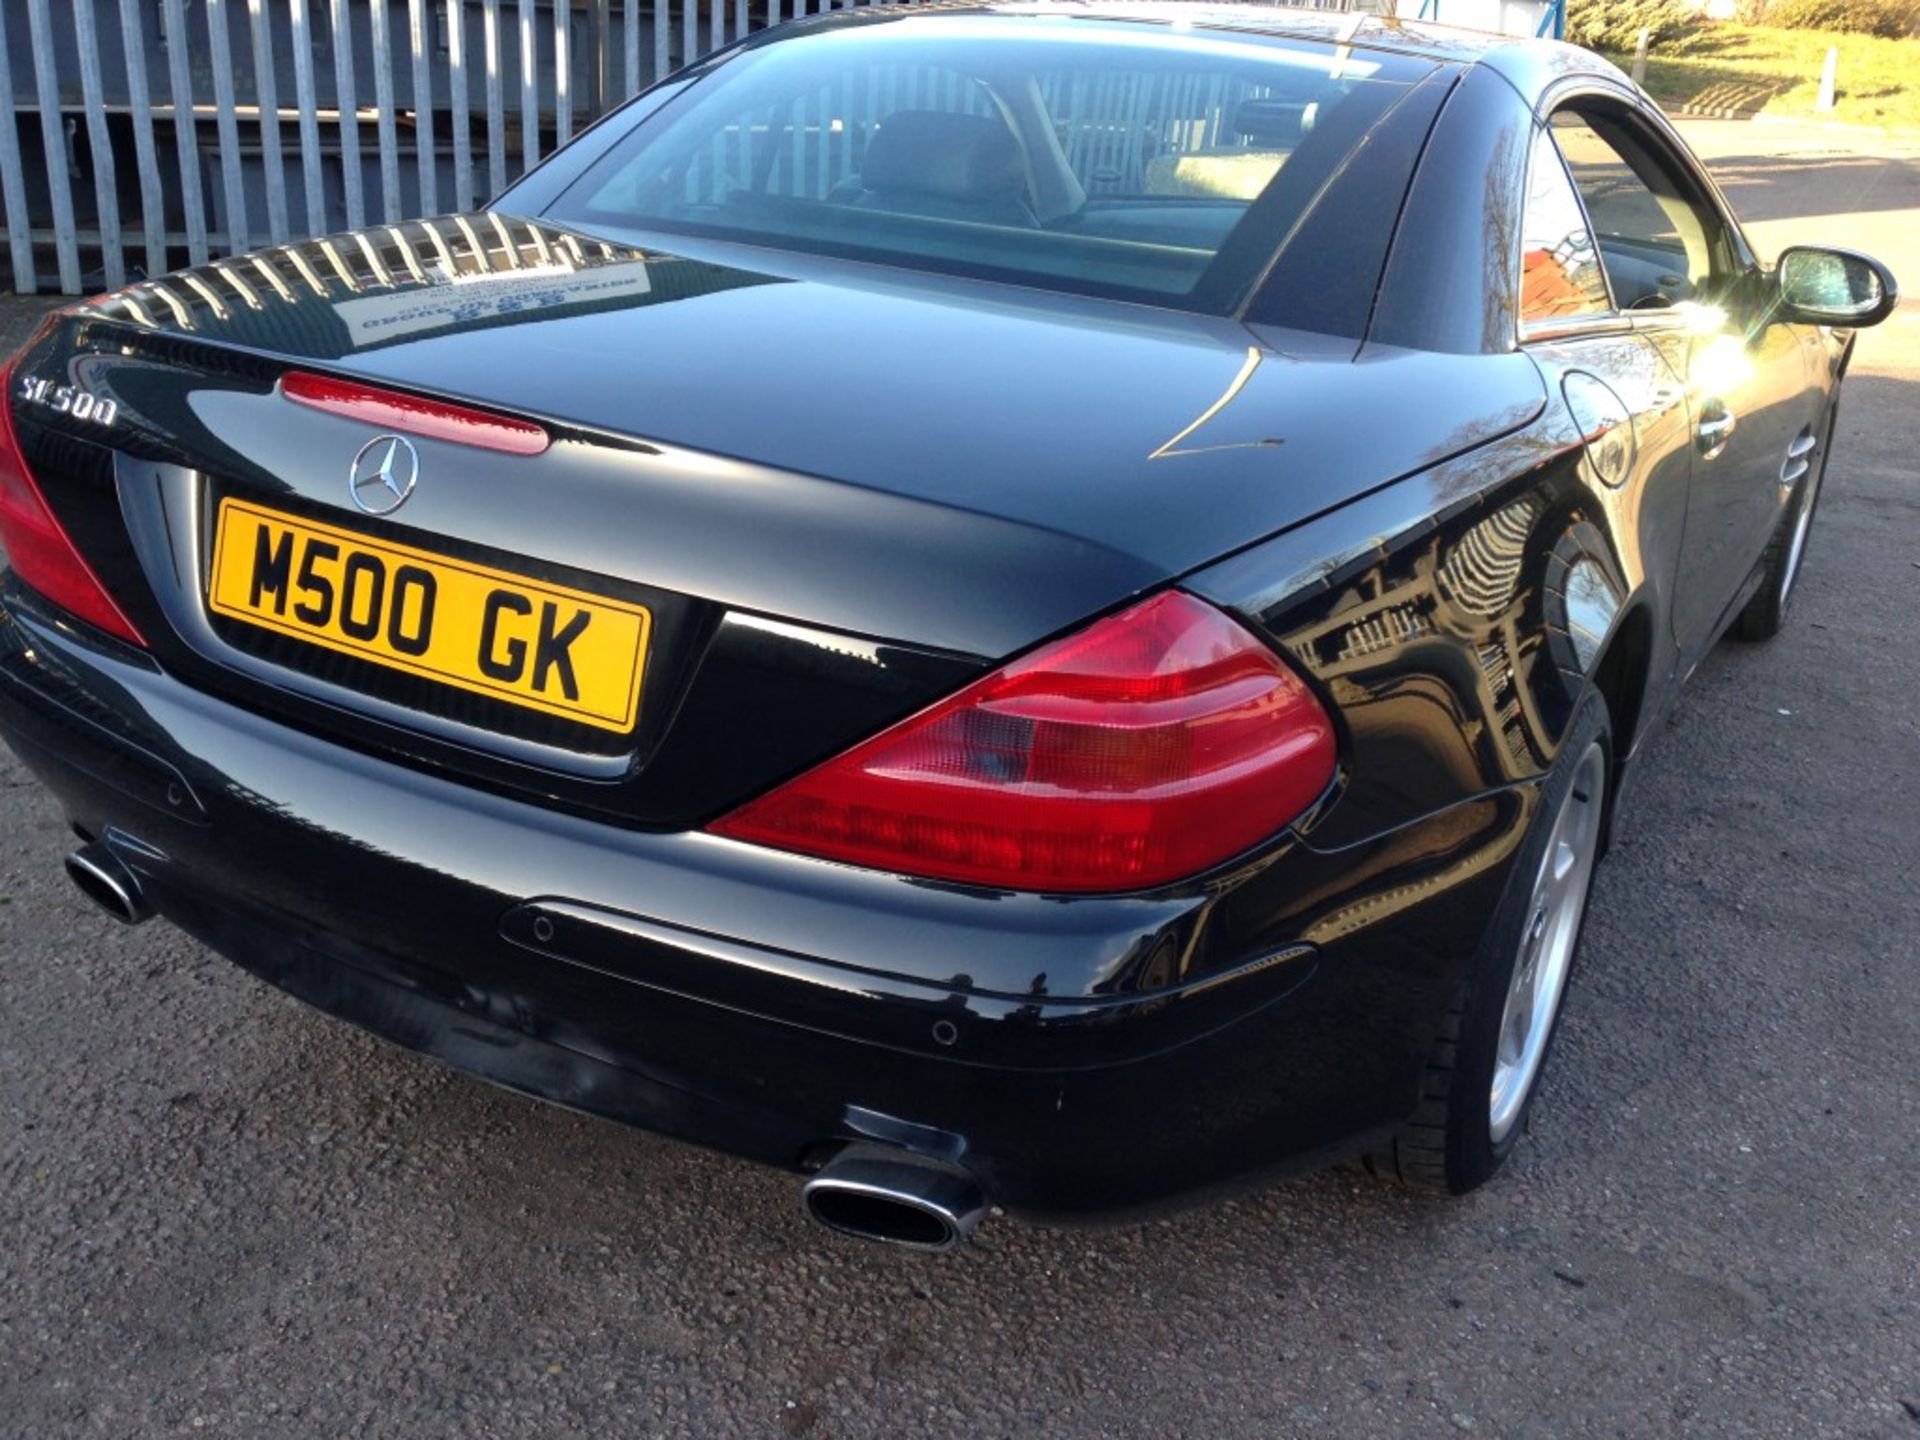 1 x Mercedes SL500 Automatic 5.0 Convertible - Petrol - Year 2002 - 94,500 Miles - Long MOT Expiry - Image 2 of 48